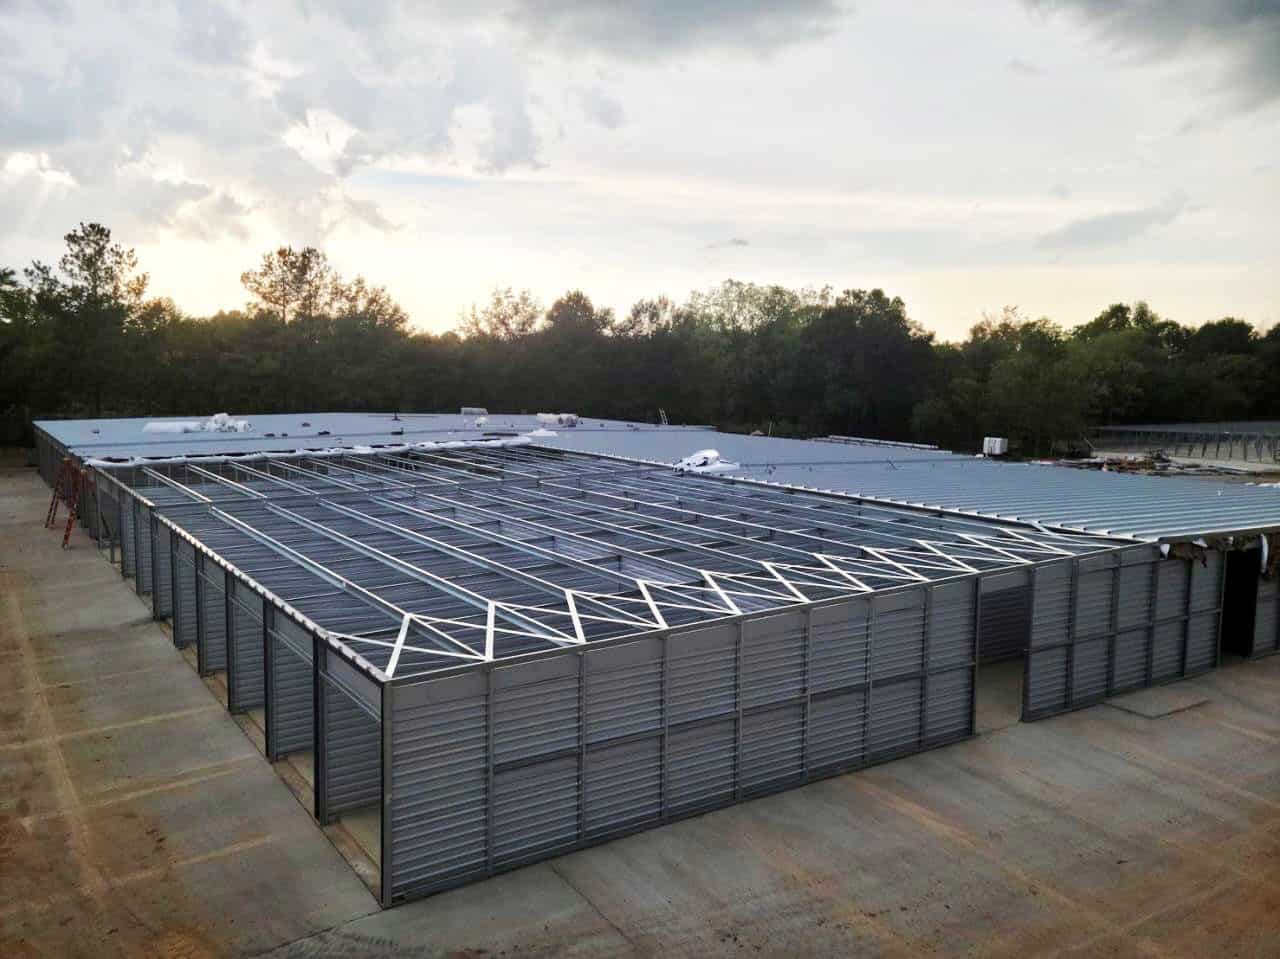 The Roll Up: Weekly Self-Storage Development News 10.5.22